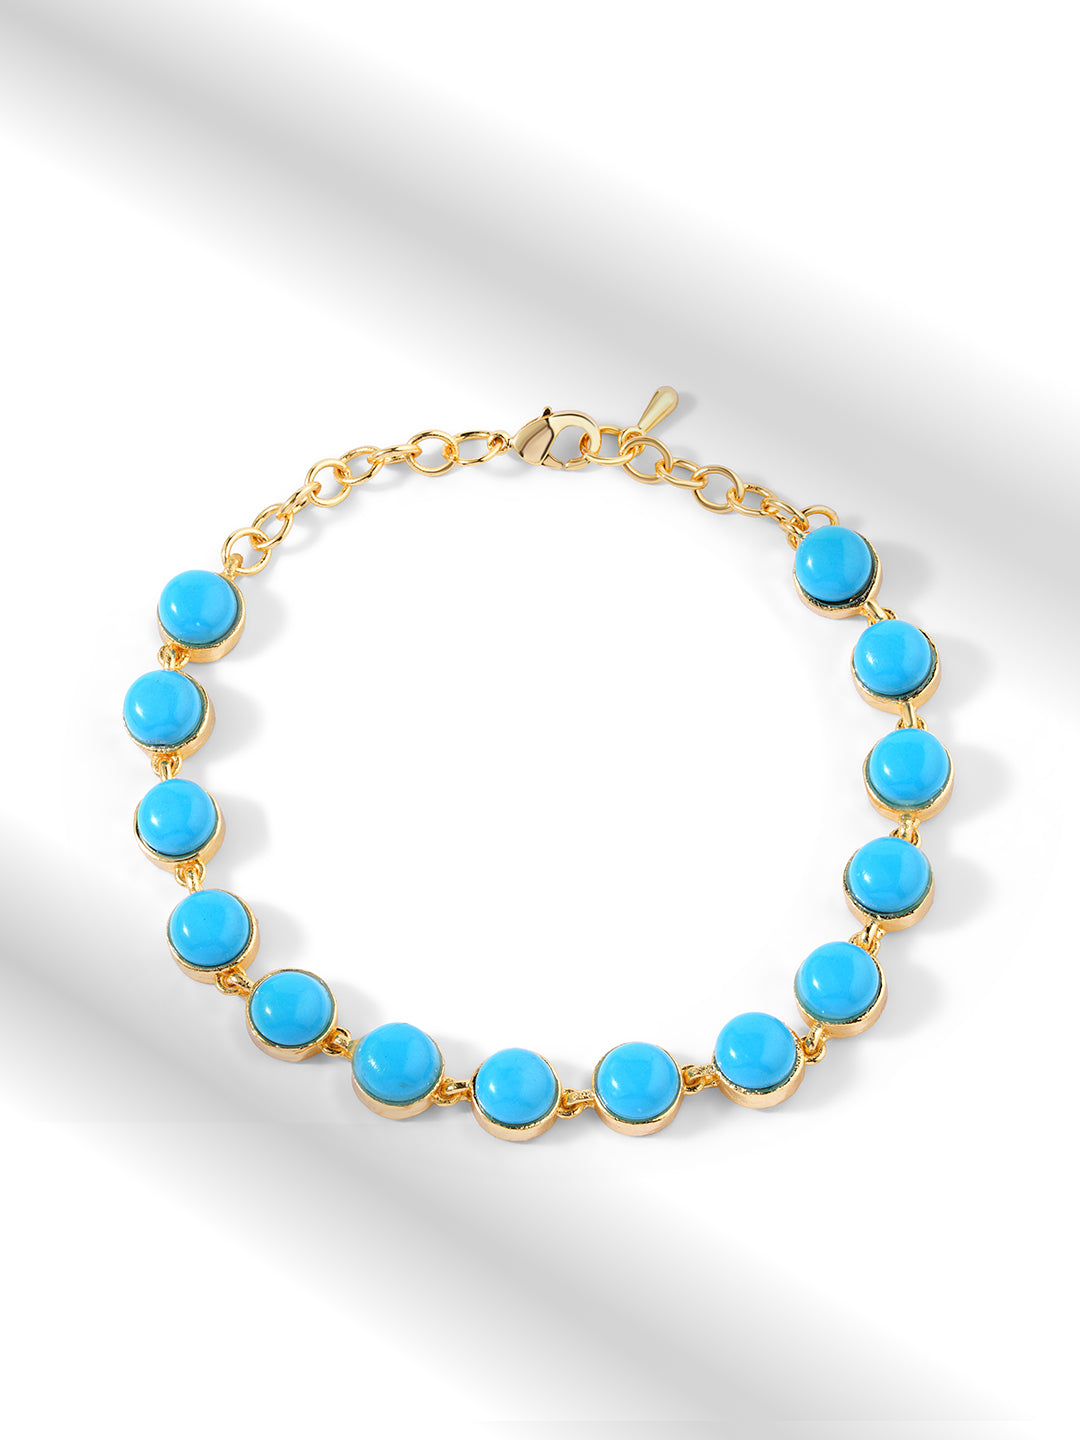 Womens White Gold Plated Turquoise Stone Tennis Bracelet